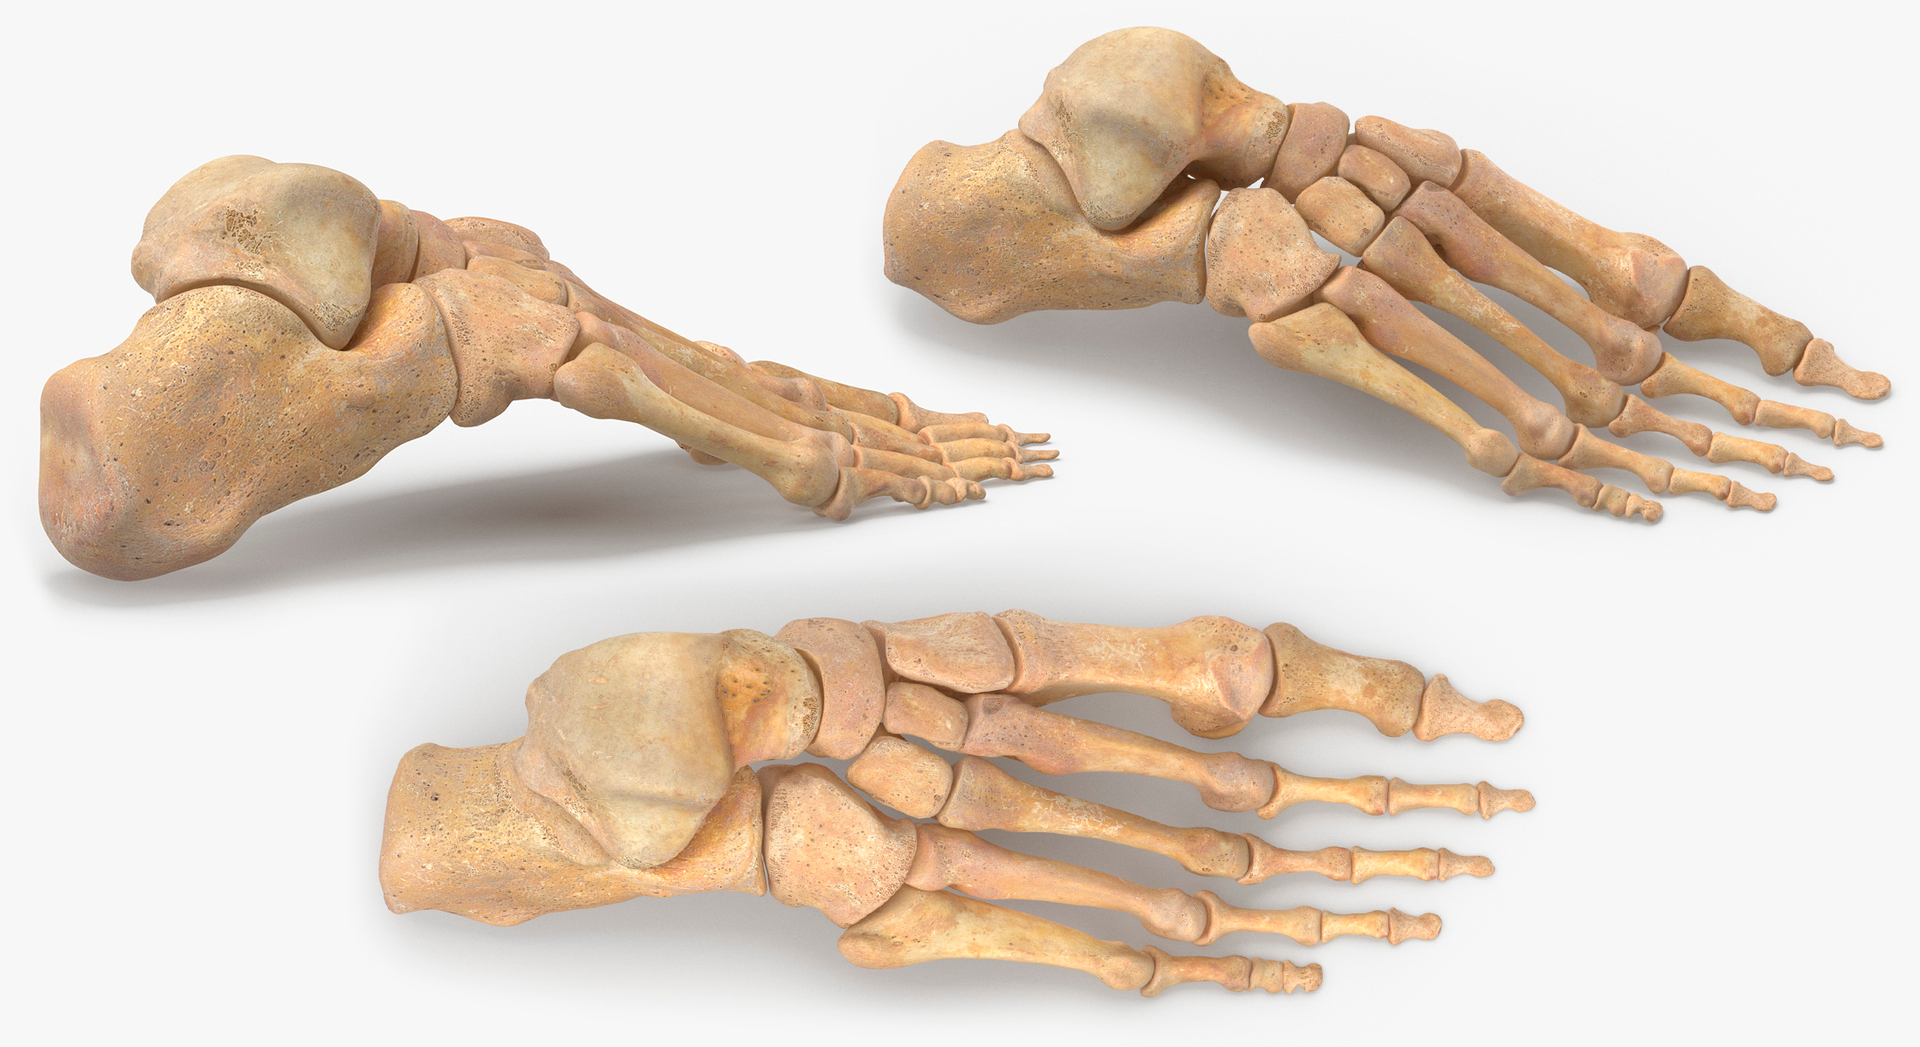 Human Hand and Foot Bones Collection White and Yellow - 4 models 3D ...